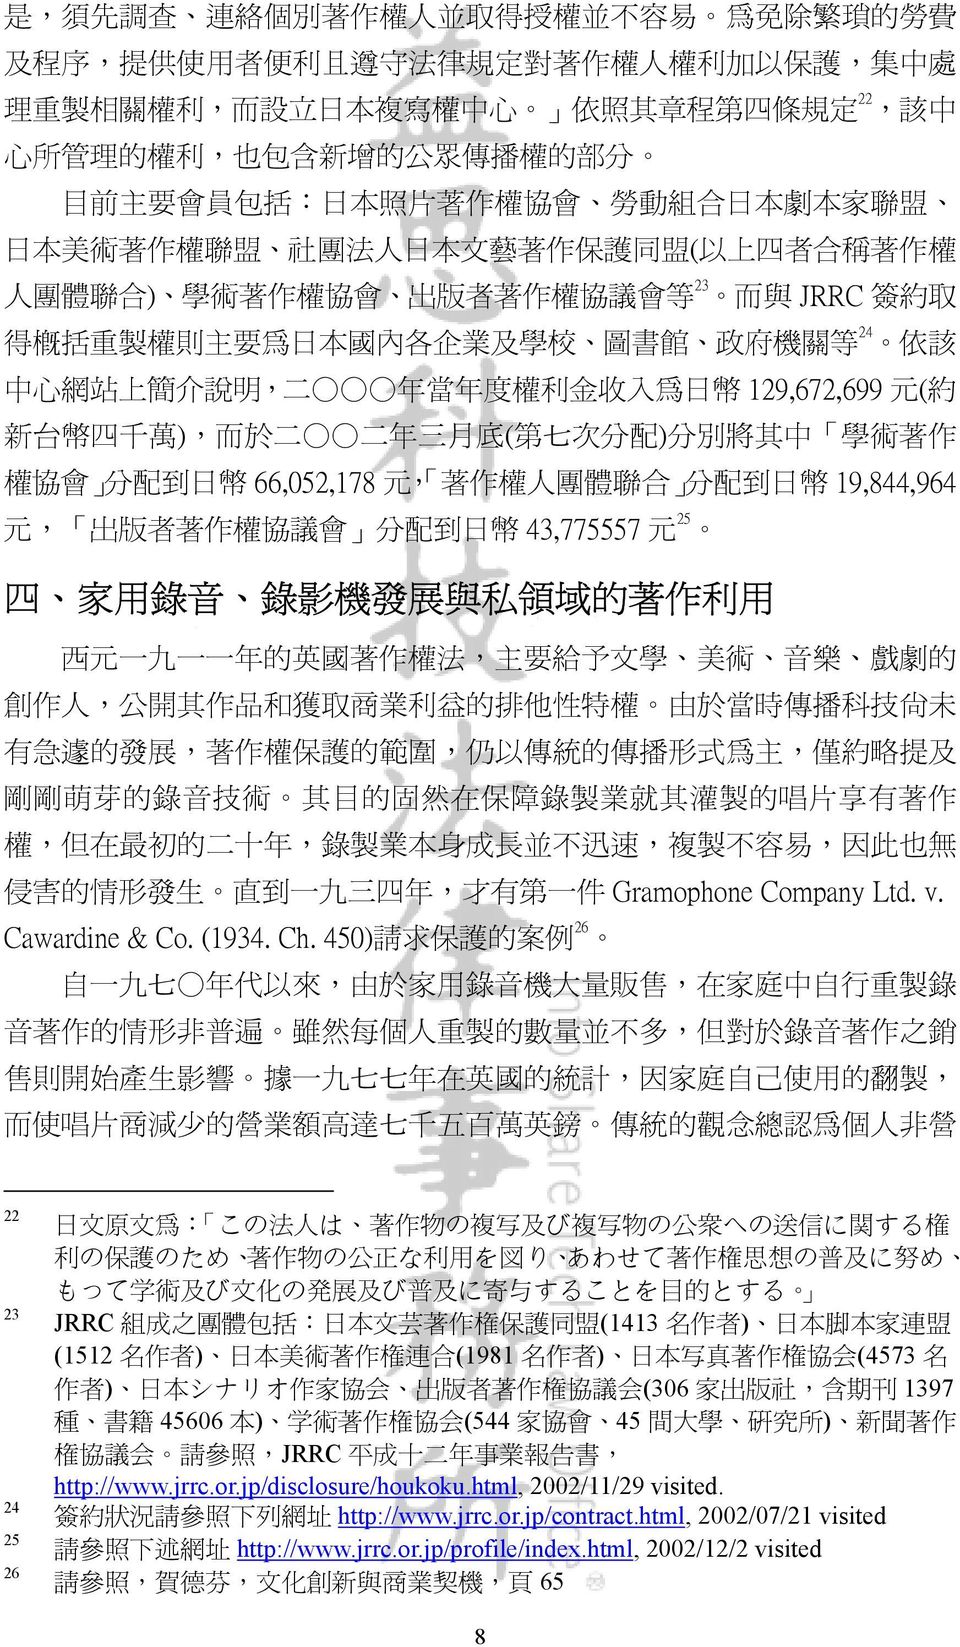 jp/disclosure/houkoku.html, 2002/11/29 visited. http://www.jrrc.or.jp/contract.